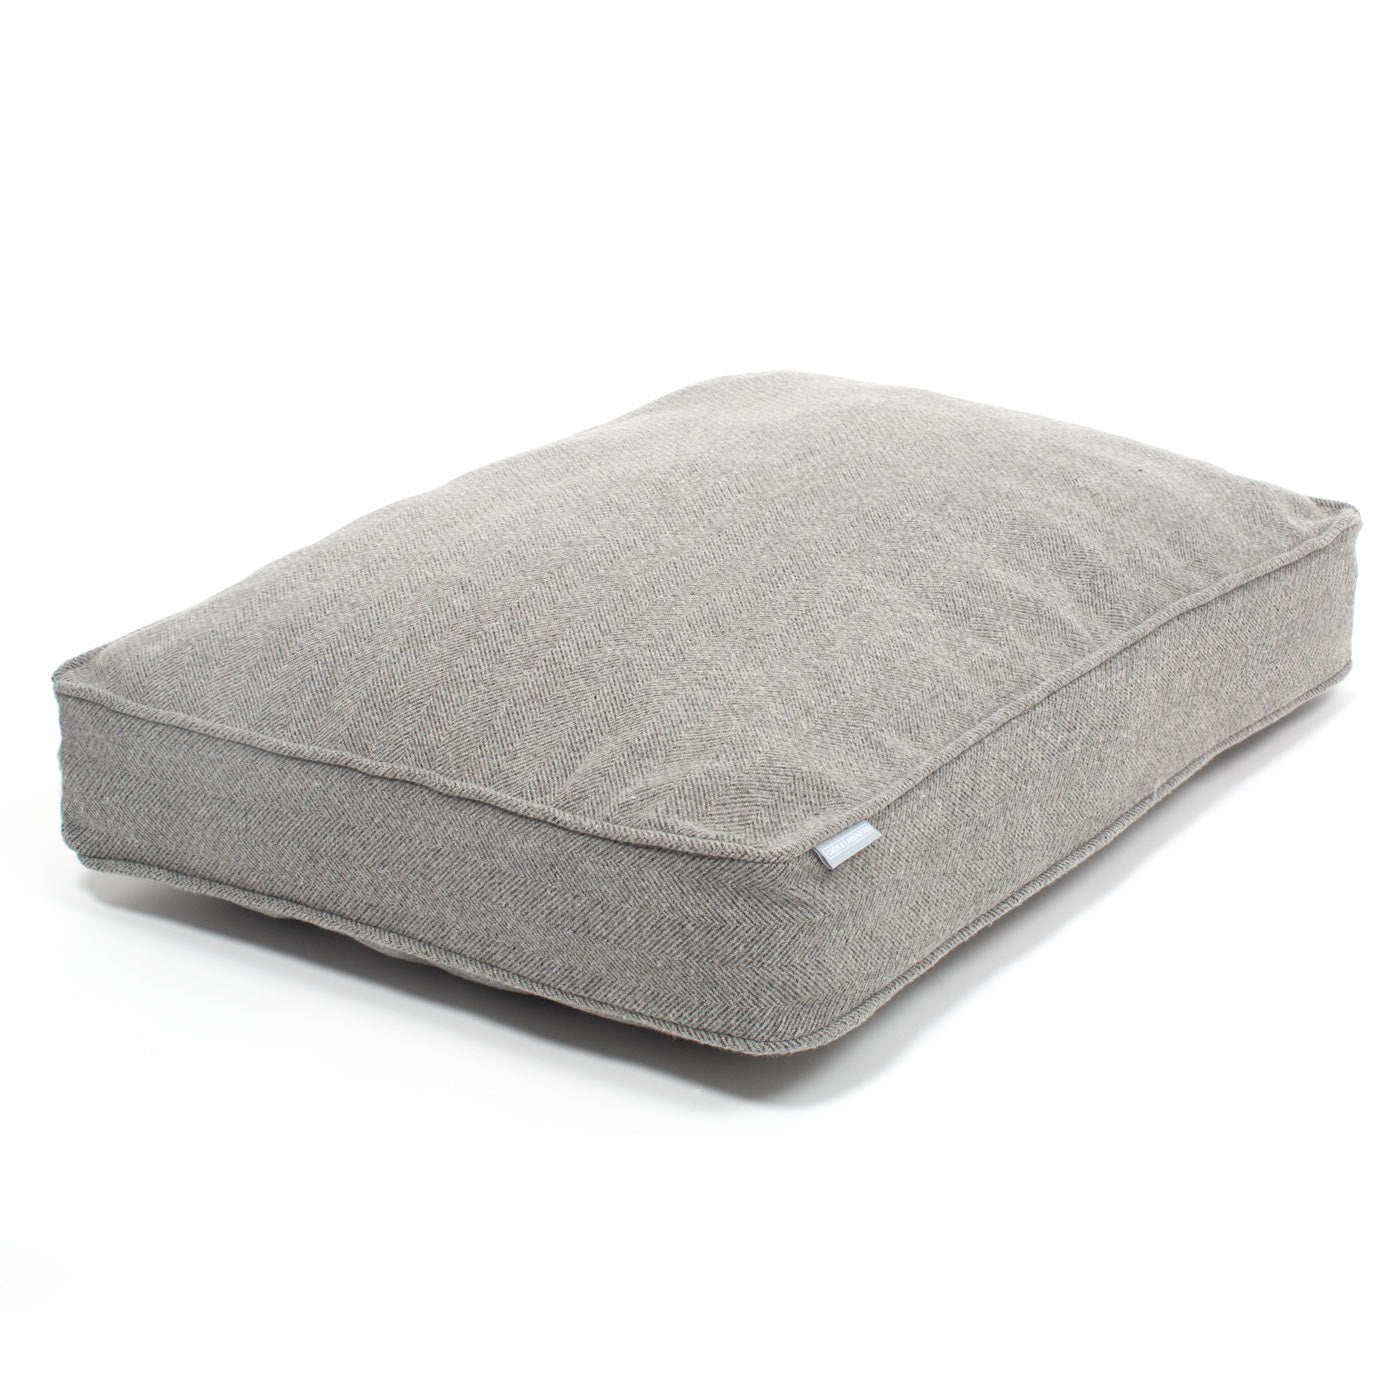 [colour:pewter herringbone] Luxury Dog Crate Cushion, Tweed collection Crate Cushion Cover in Pewter Herringbone Tweed, The Perfect Dog Crate Accessory, Available Now at Lords & Labradors